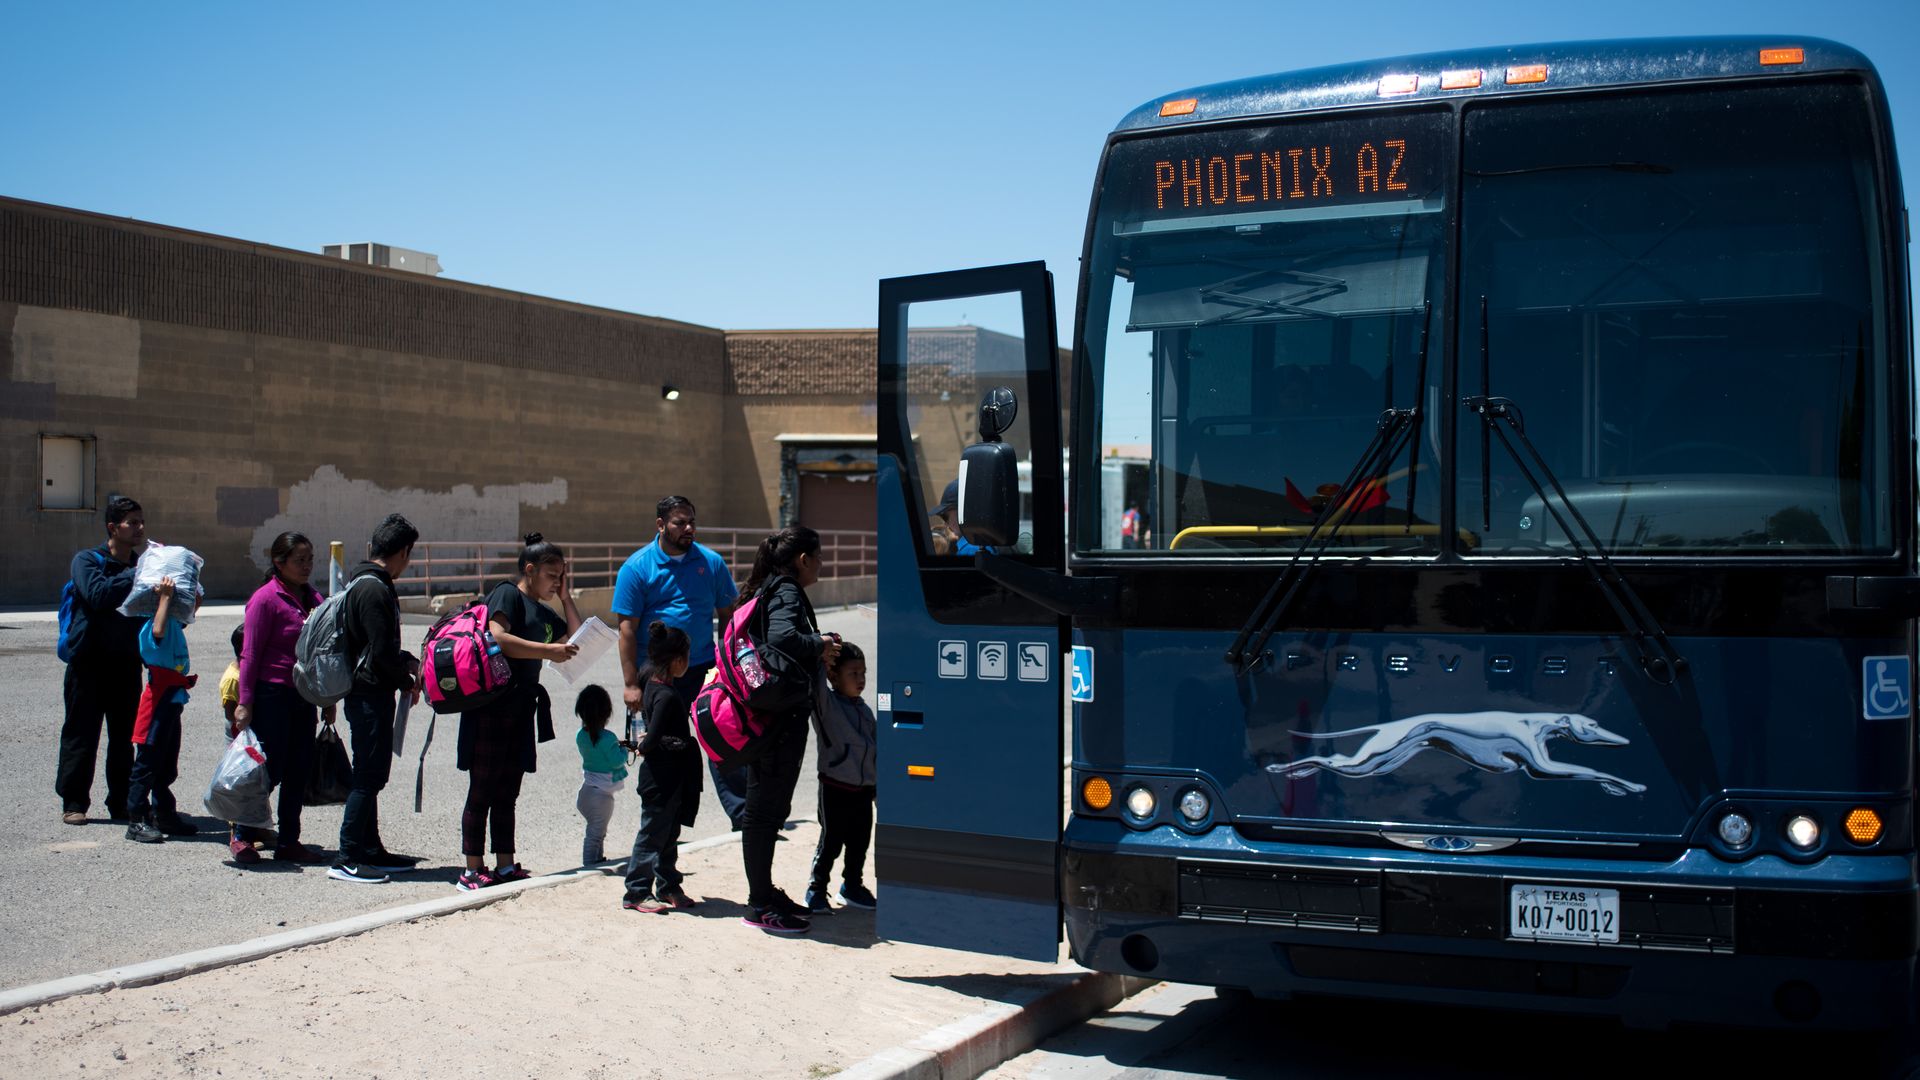 This image shows a line of children boarding a bus.